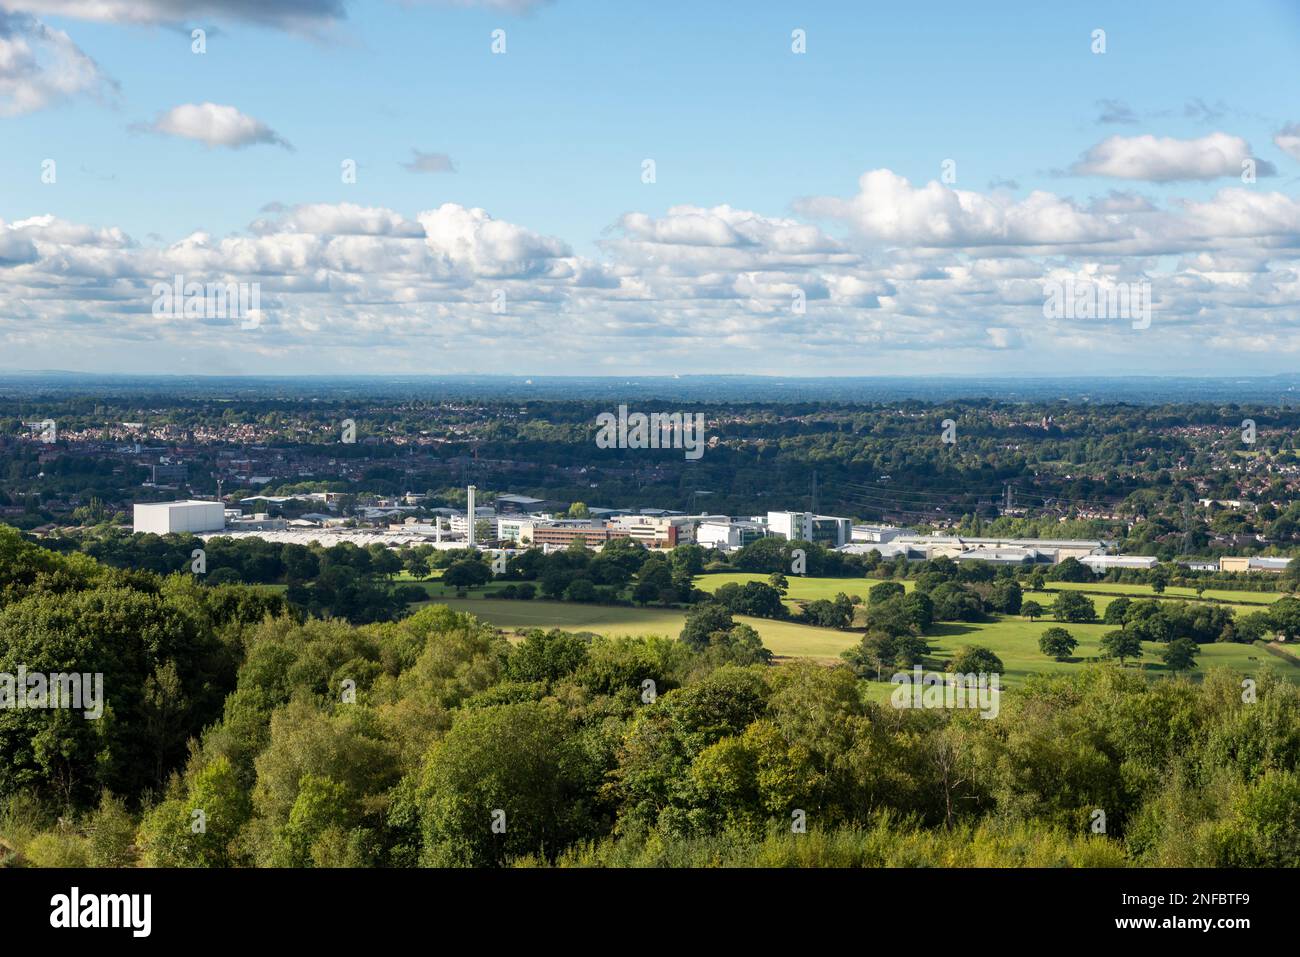 The town of Macclesfield seen from Kerridge Hill, Cheshire, England. Stock Photo